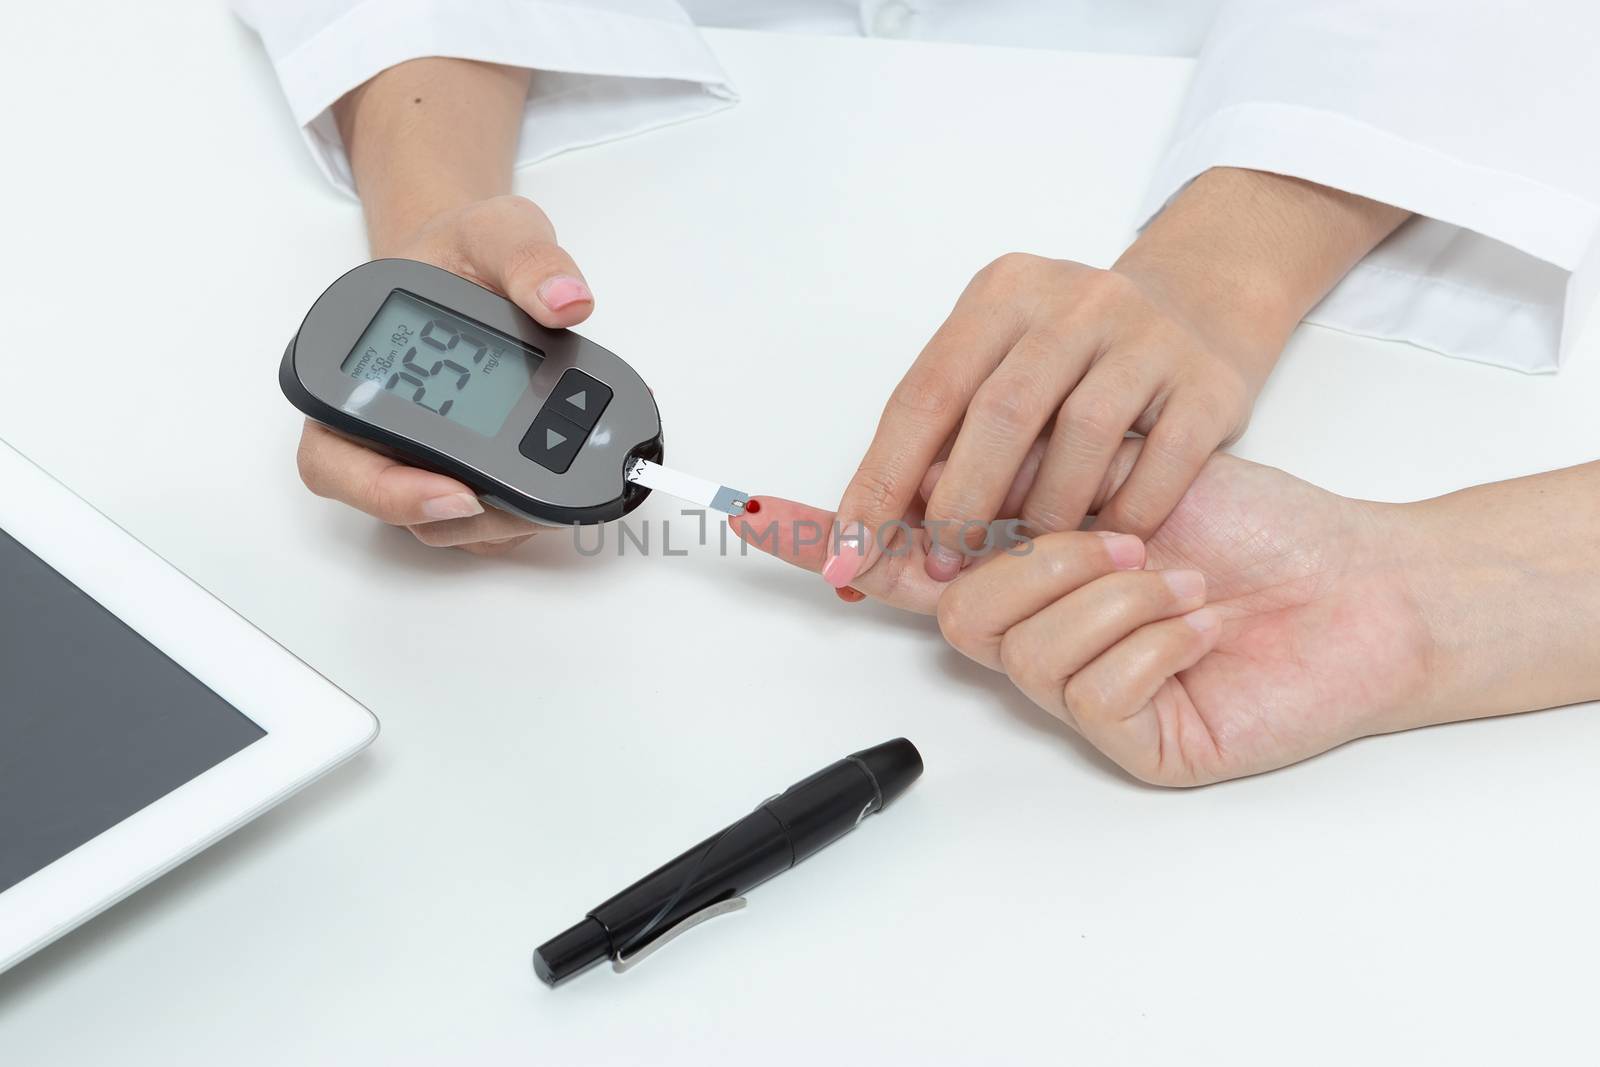 check diabetes. patient with diabetes let doctor put a drop of blood on a test strip into a meter for check blood sugar (glucose) levels results. health care concept 